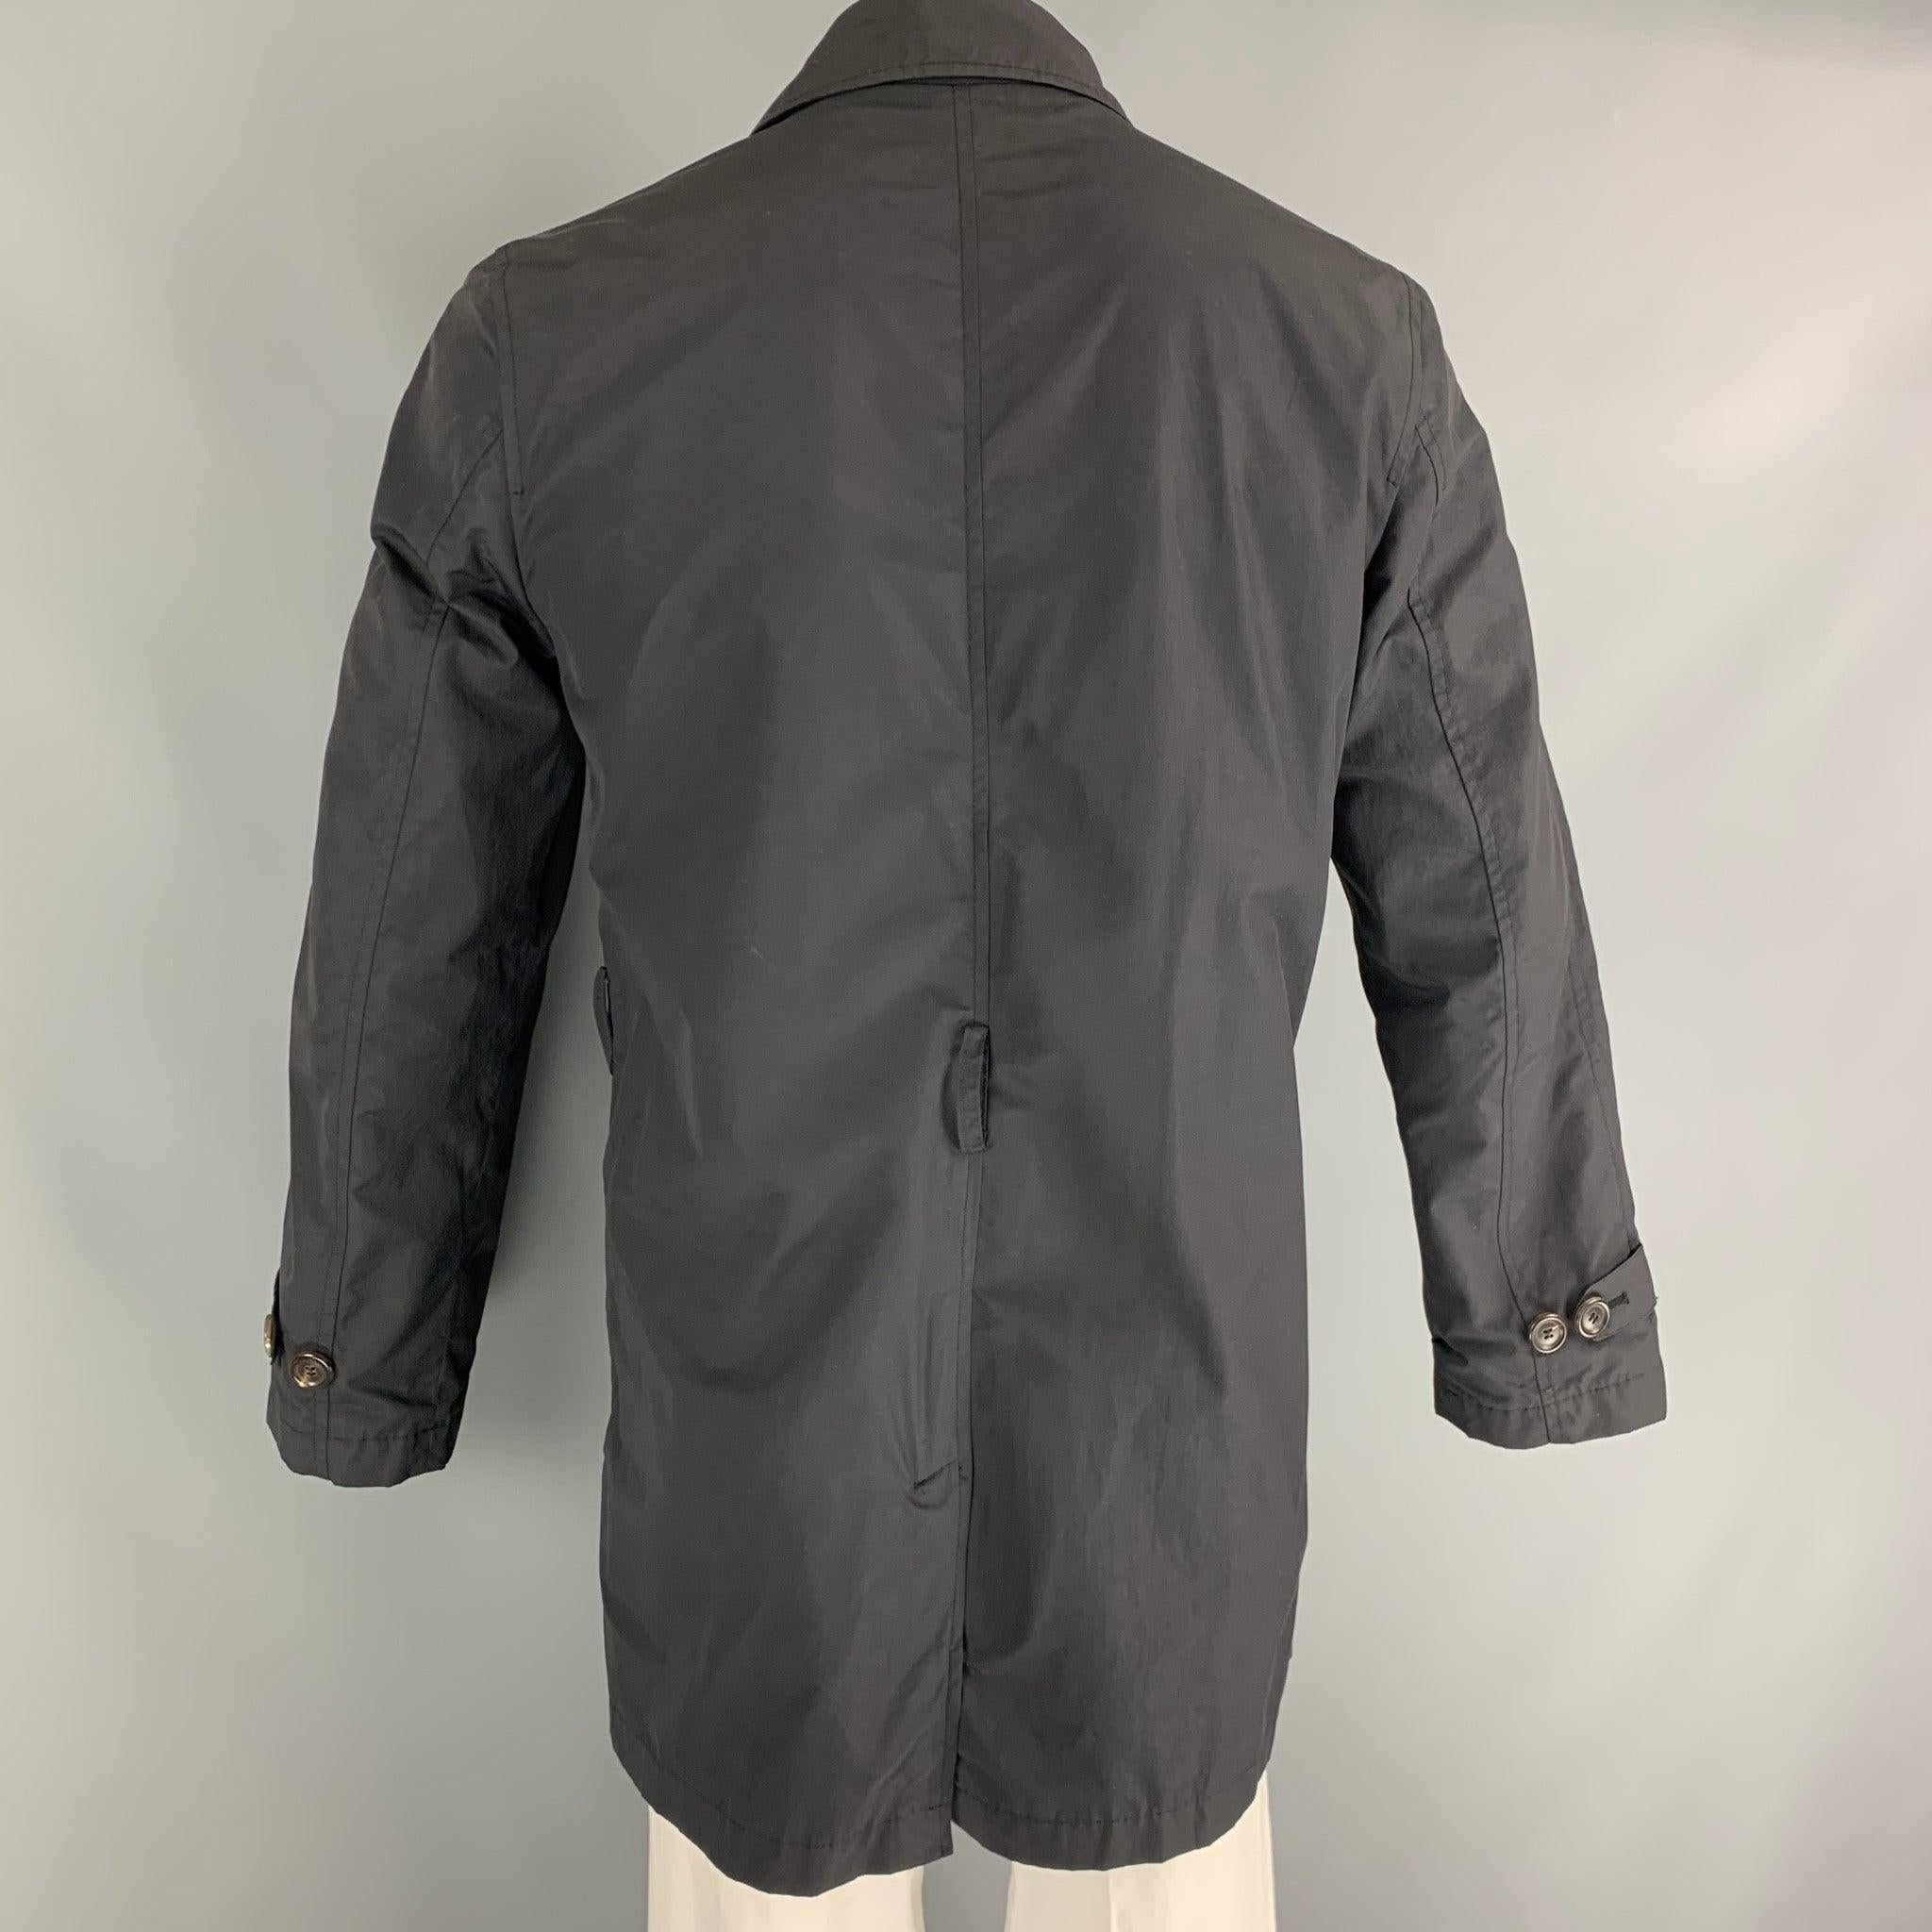 PAUL SMITH Size M Black Cotton / Nylon Trench Jacket In Excellent Condition For Sale In San Francisco, CA